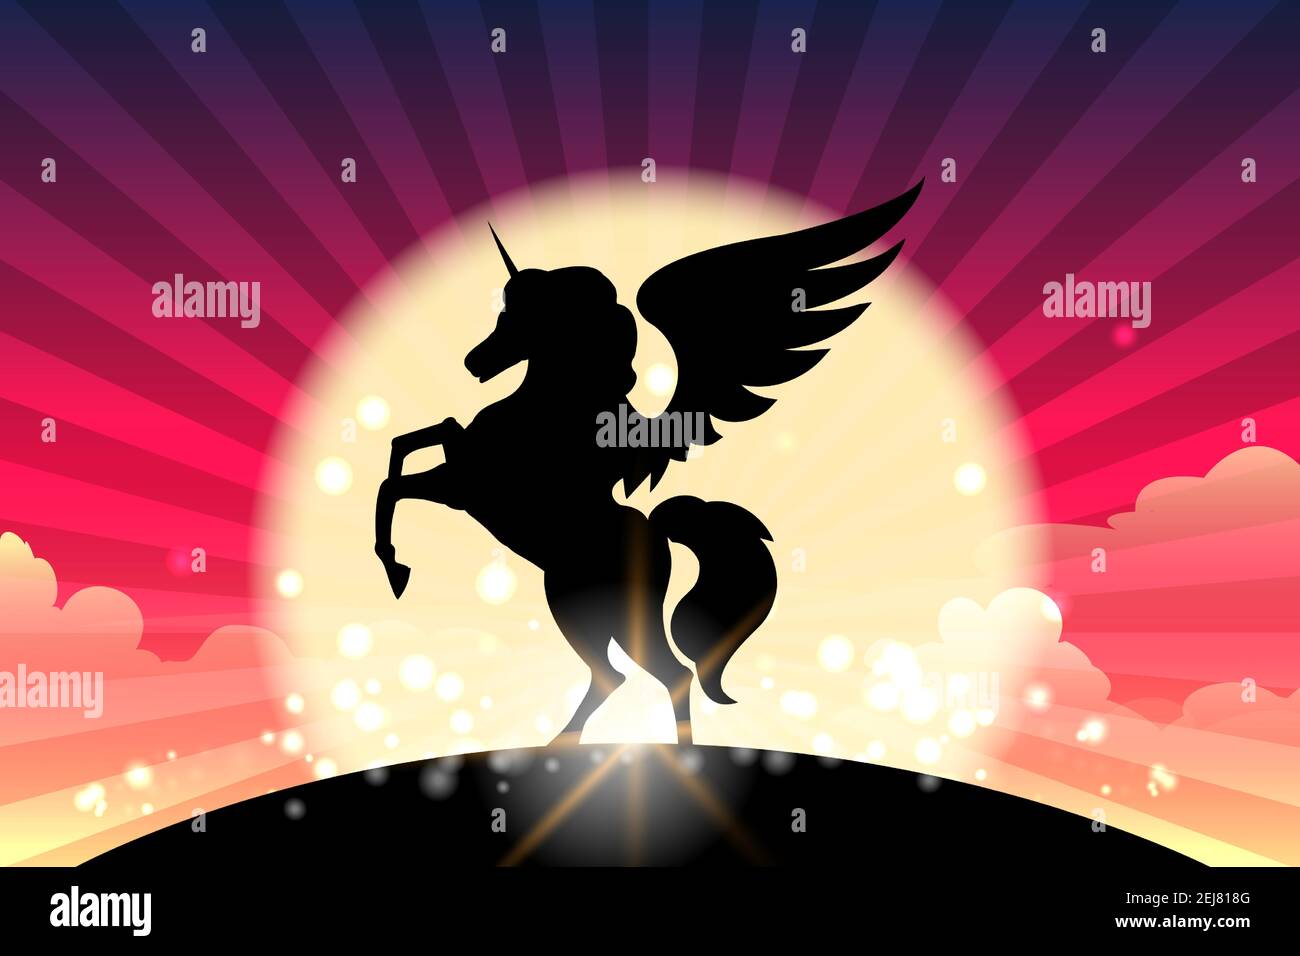 Silhouette of Prancing Unicorn with wings. Vector illustration. Stock Vector